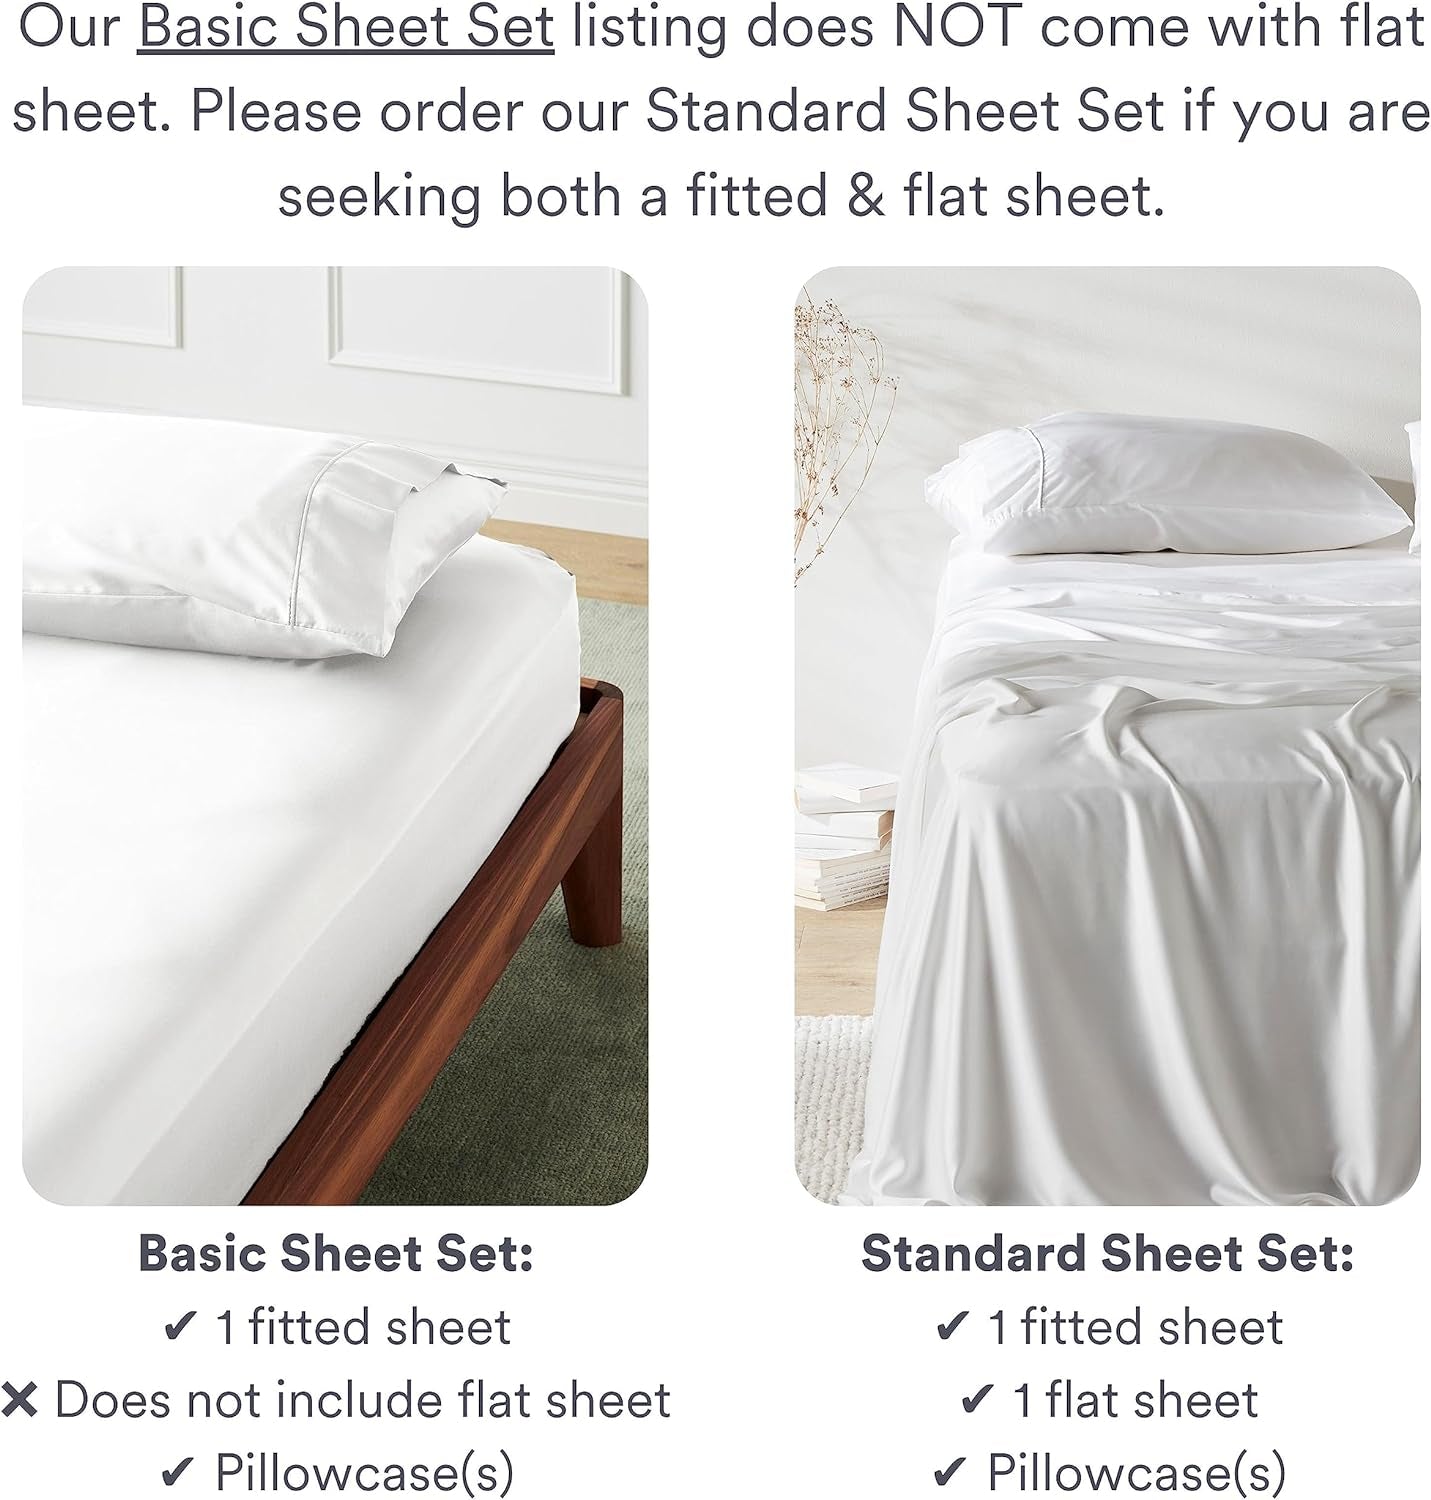 Basic Sheet Set, Cloud (White), King - Breathable Sheets, Bamboo Bedding, Sustainable, Sateen, Plant-Based Fabric, Silky-Soft, Deep Pockets, Cleanbamboo